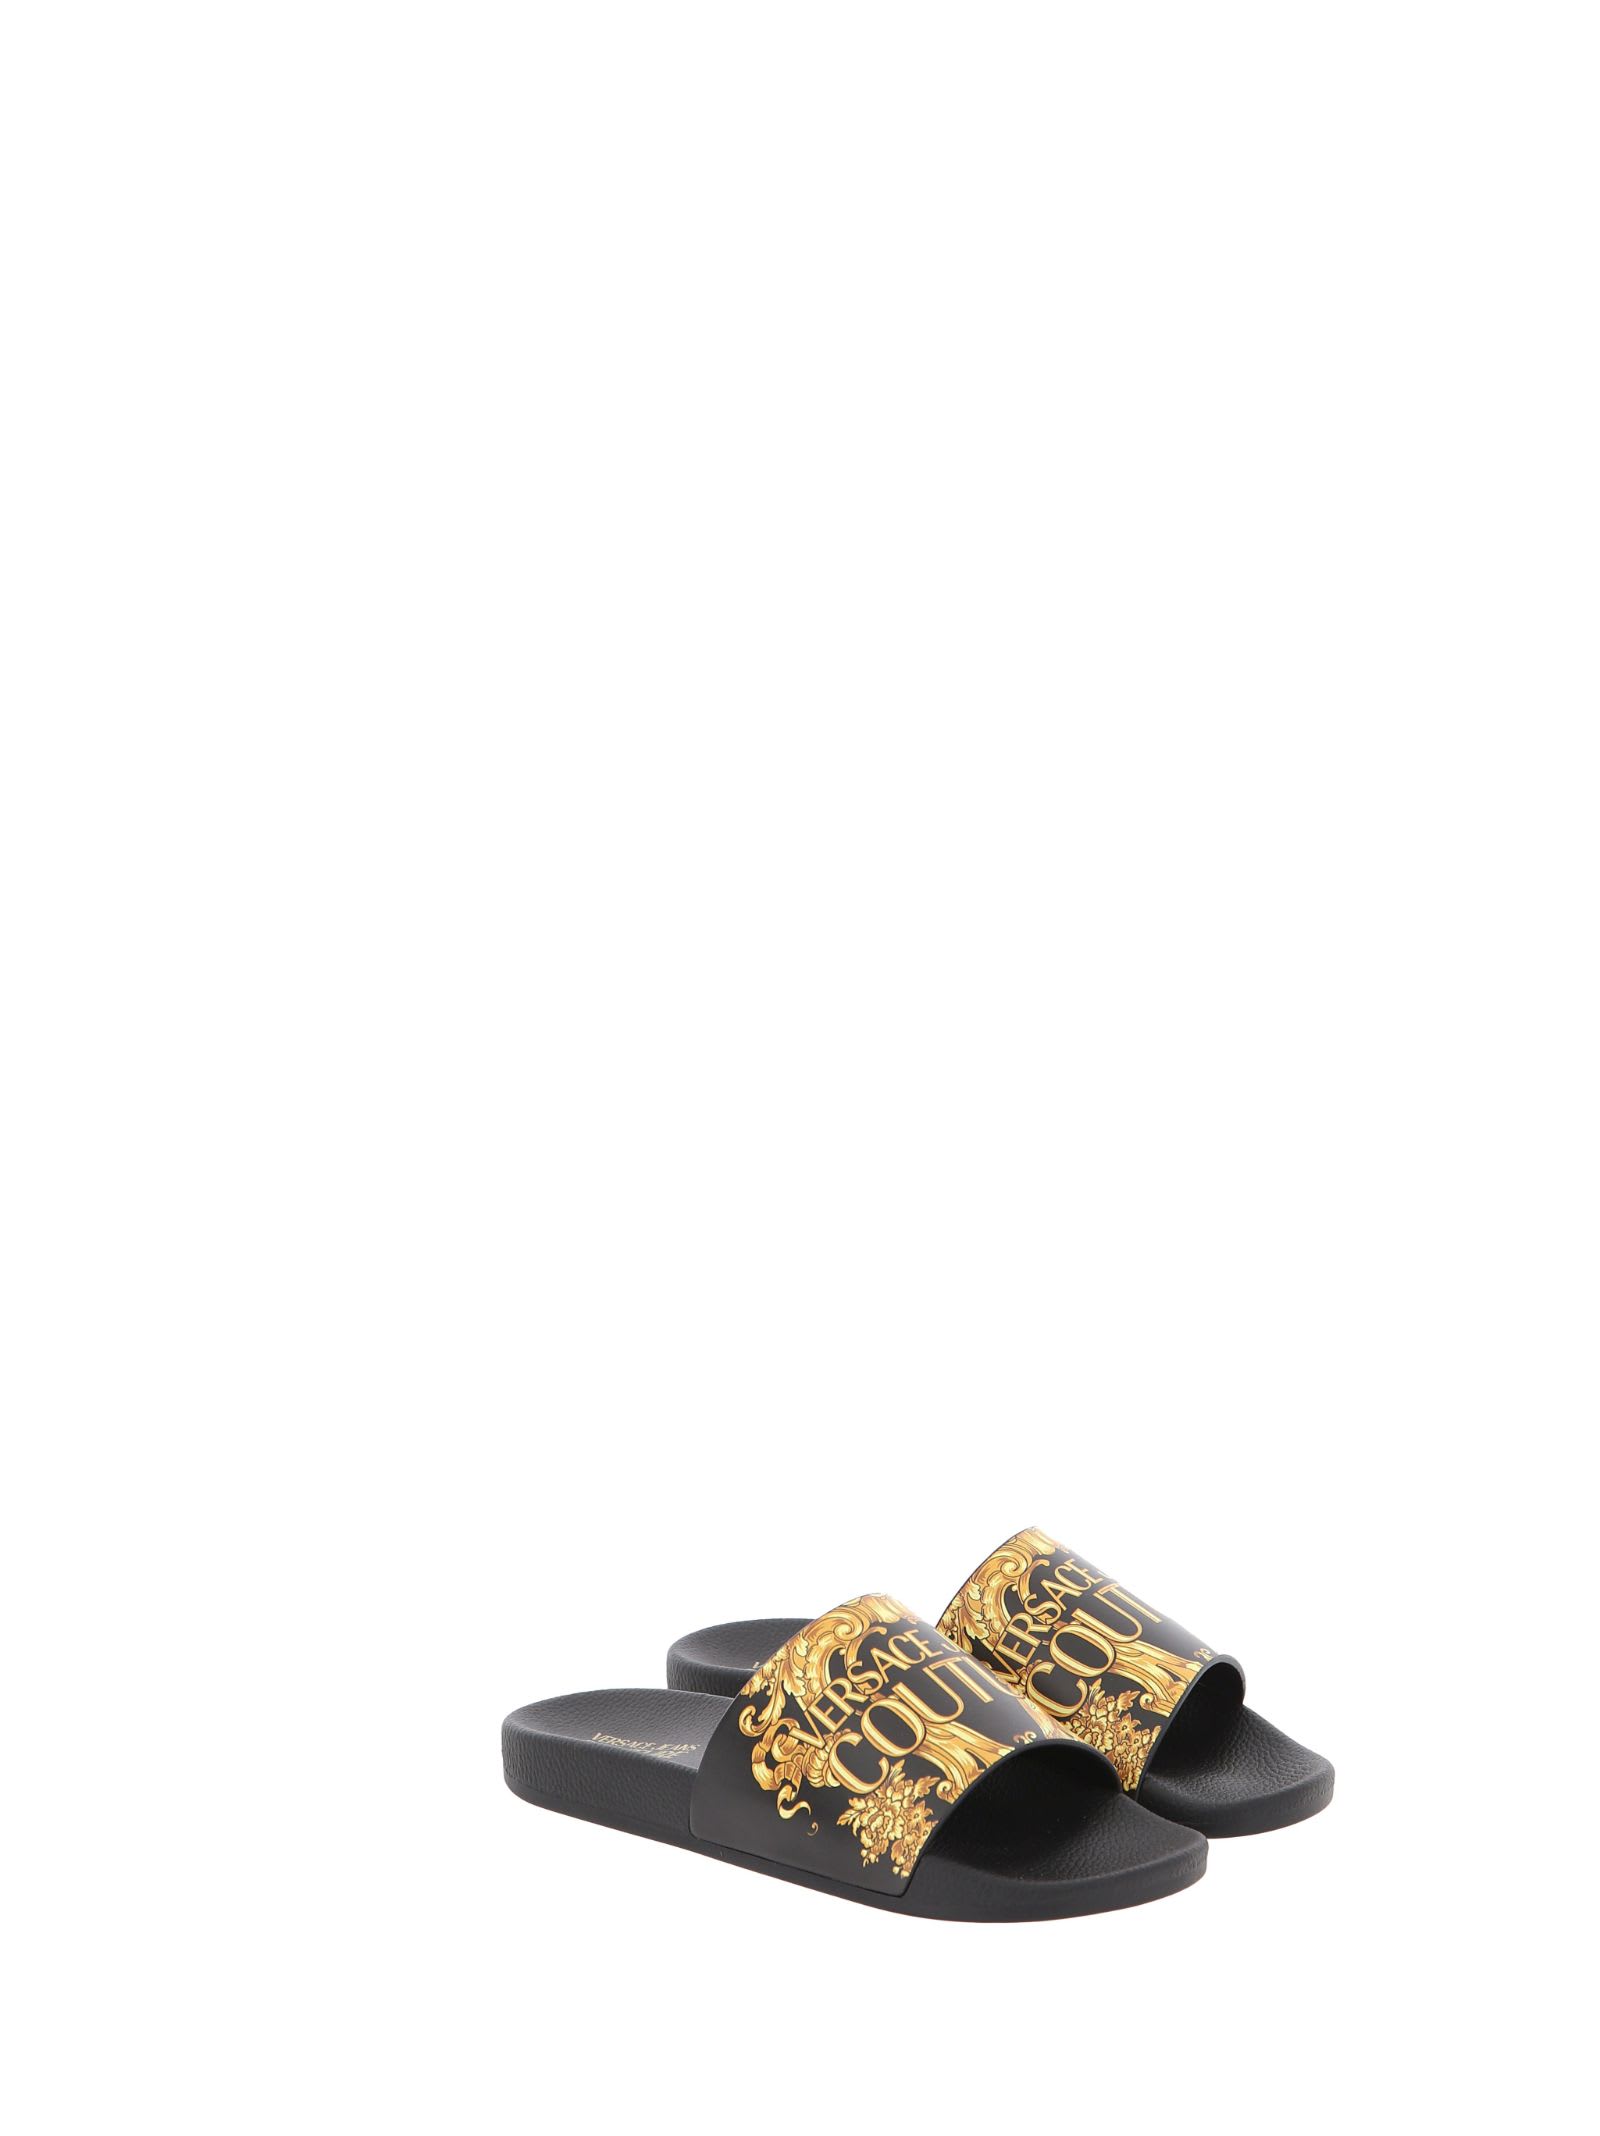 Versace Jeans Couture Shoes In Black/gold